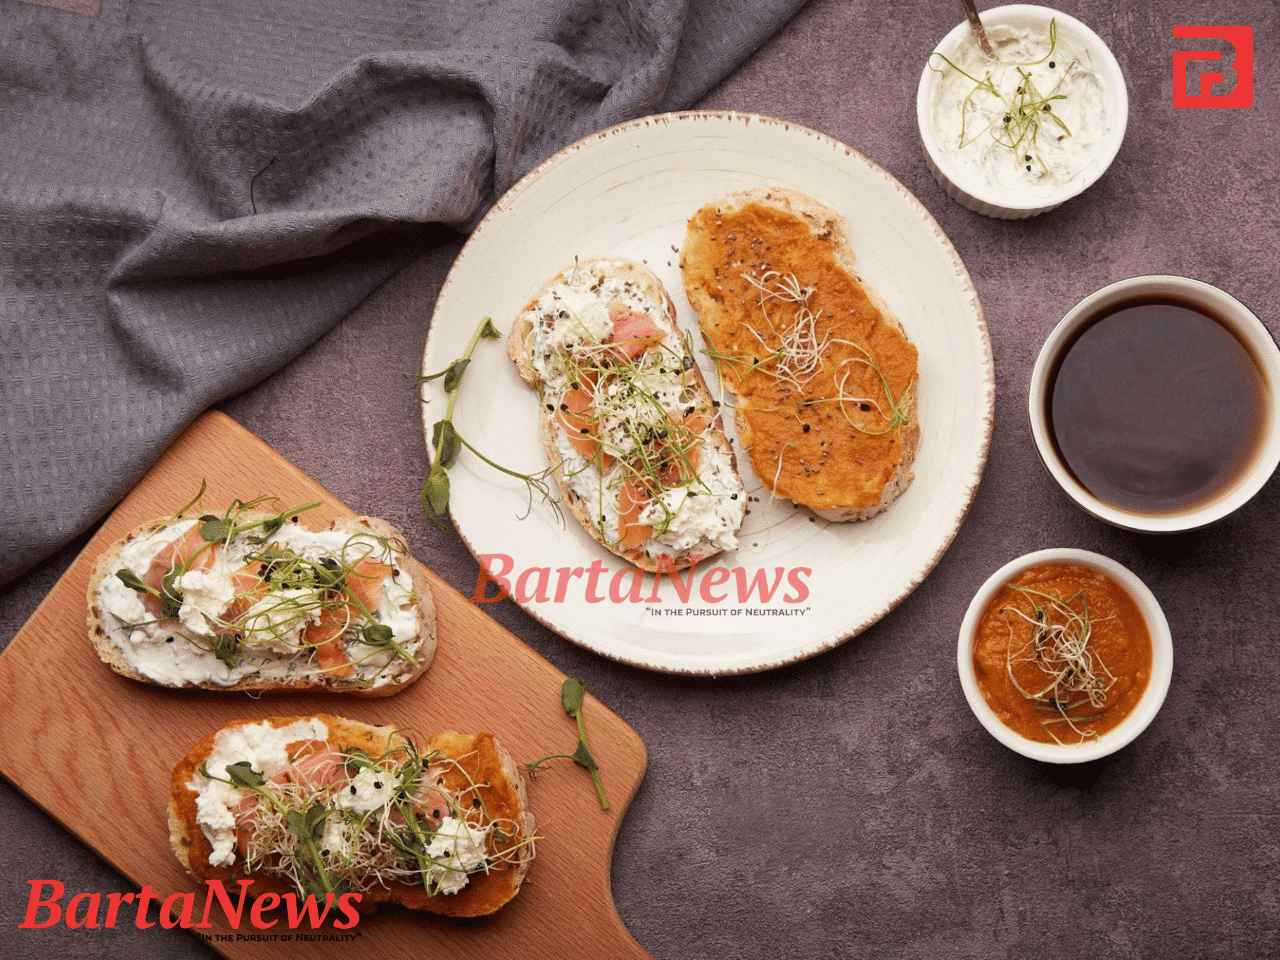 “Latest News: Southern Spain’s Popular Dish – Moroccan Salmon with Garlic Mayonnaise”